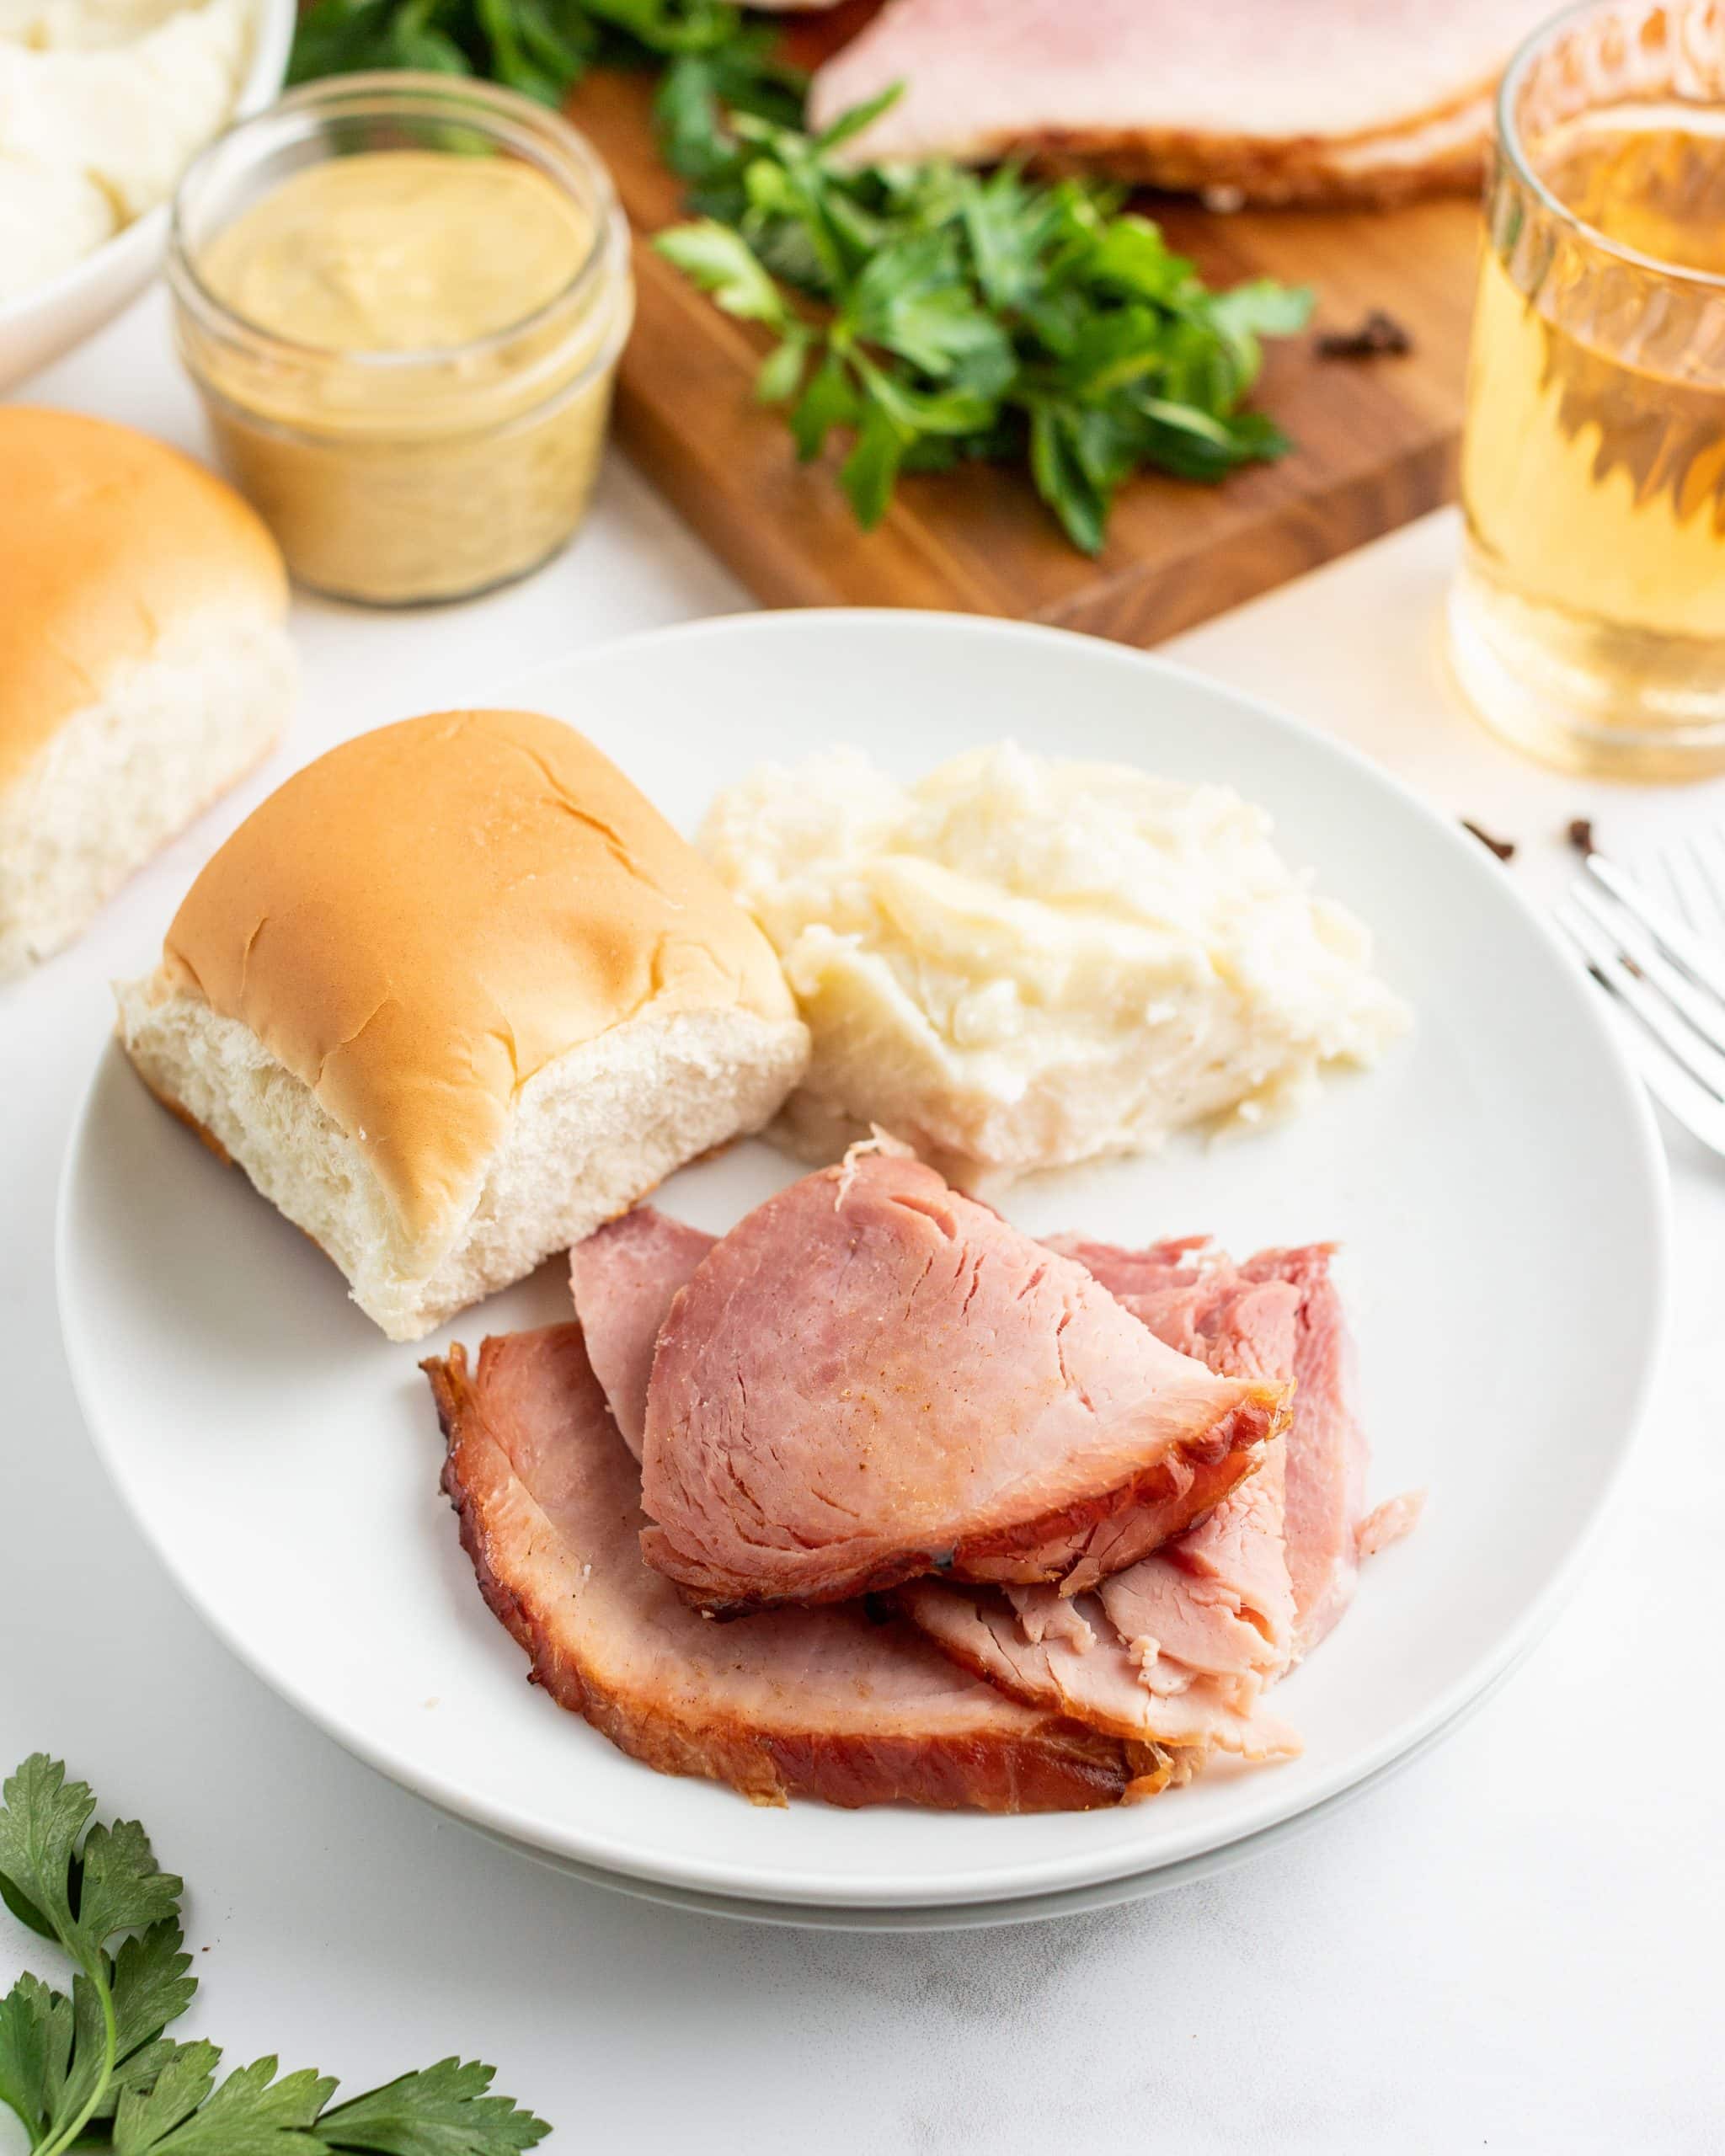 Slices of ham on a dinner plate with a roll and mashed potatoes.